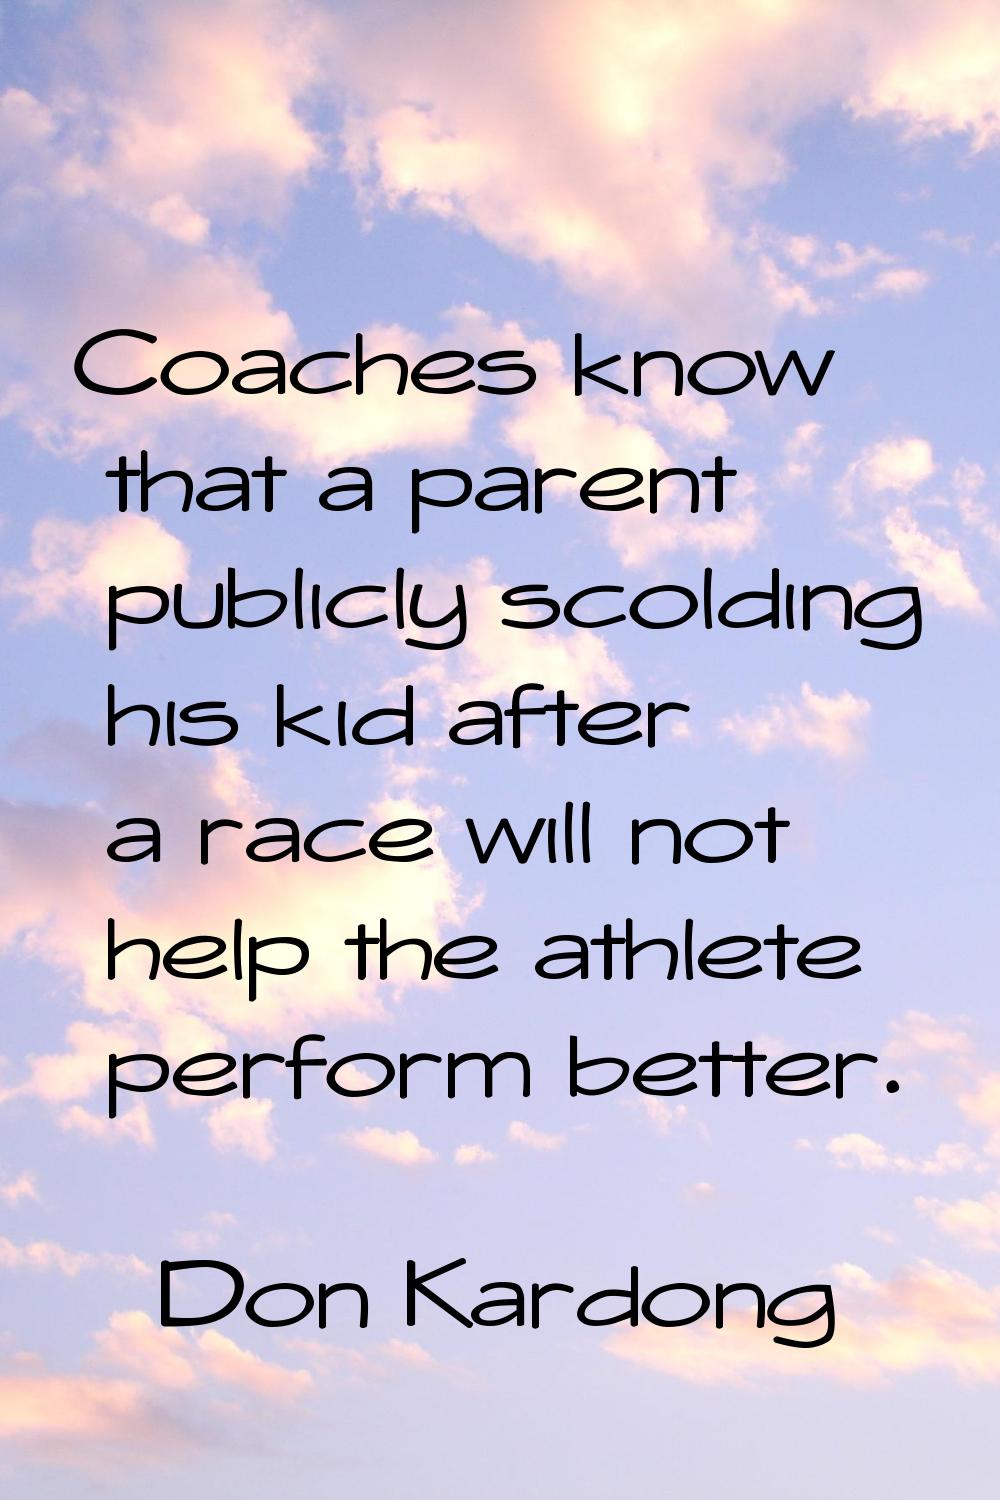 Coaches know that a parent publicly scolding his kid after a race will not help the athlete perform